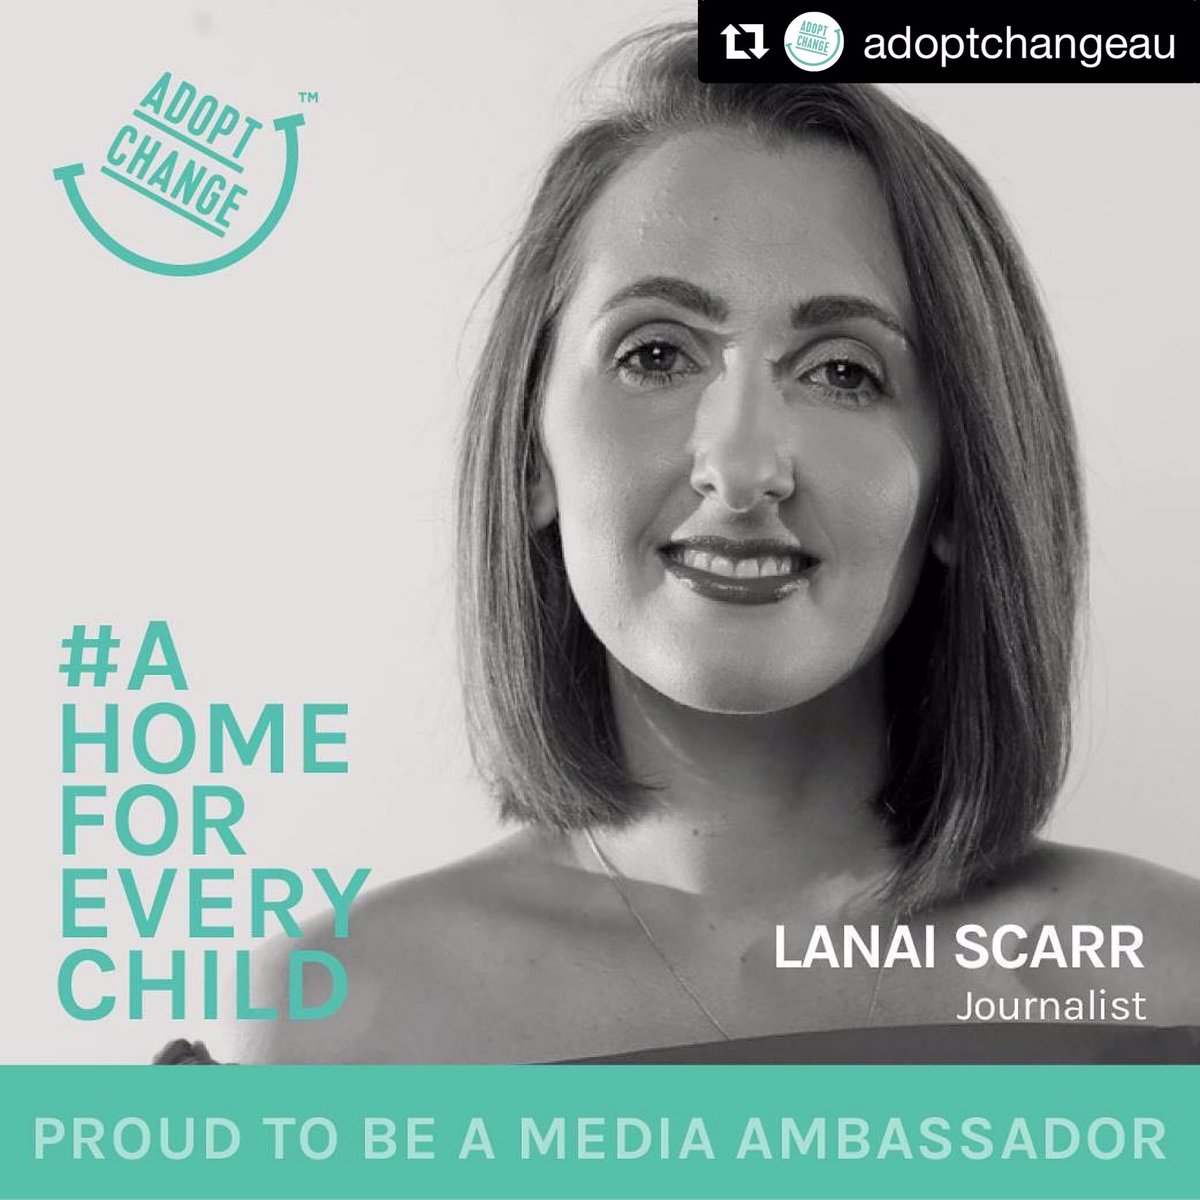 Some other exciting news. I’m so thrilled to be an @AdoptChangeAU ambassador and able to work more closely with this fantastic organisation and do more to help get the close to 50,000 Aussie kids in out-of-home care more permanent, stable homes #adoptchange #ahomeforeverychild